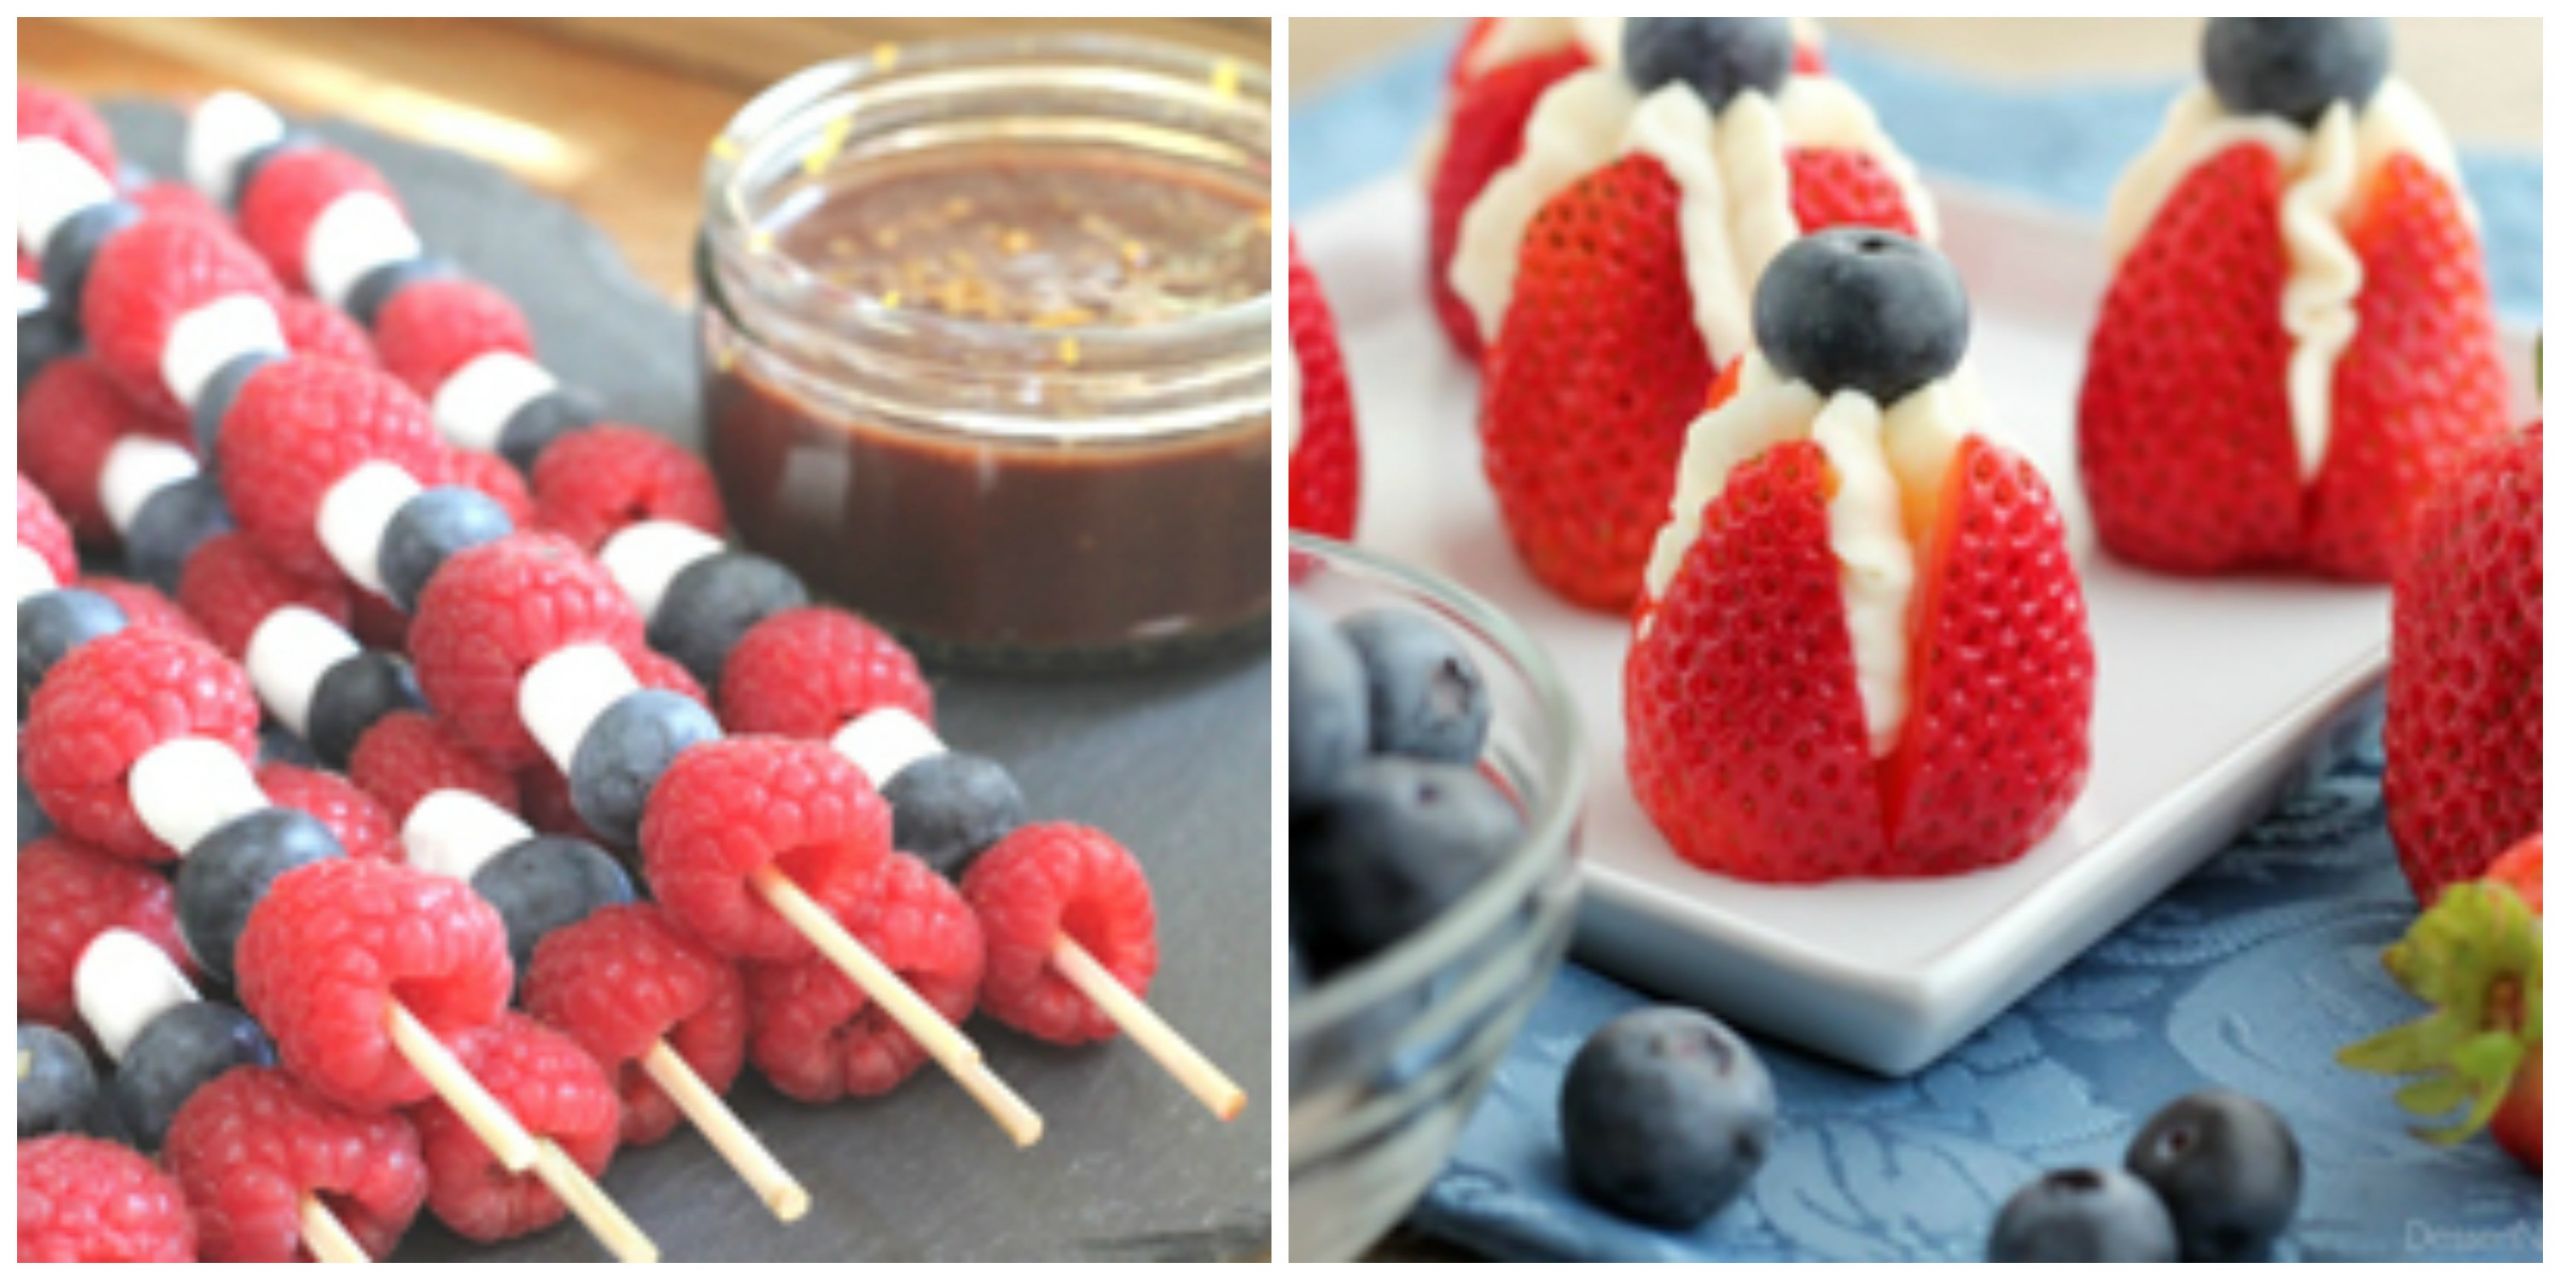 Healthy Fourth Of July Desserts
 9 Healthy 4th of July Dessert Recipes